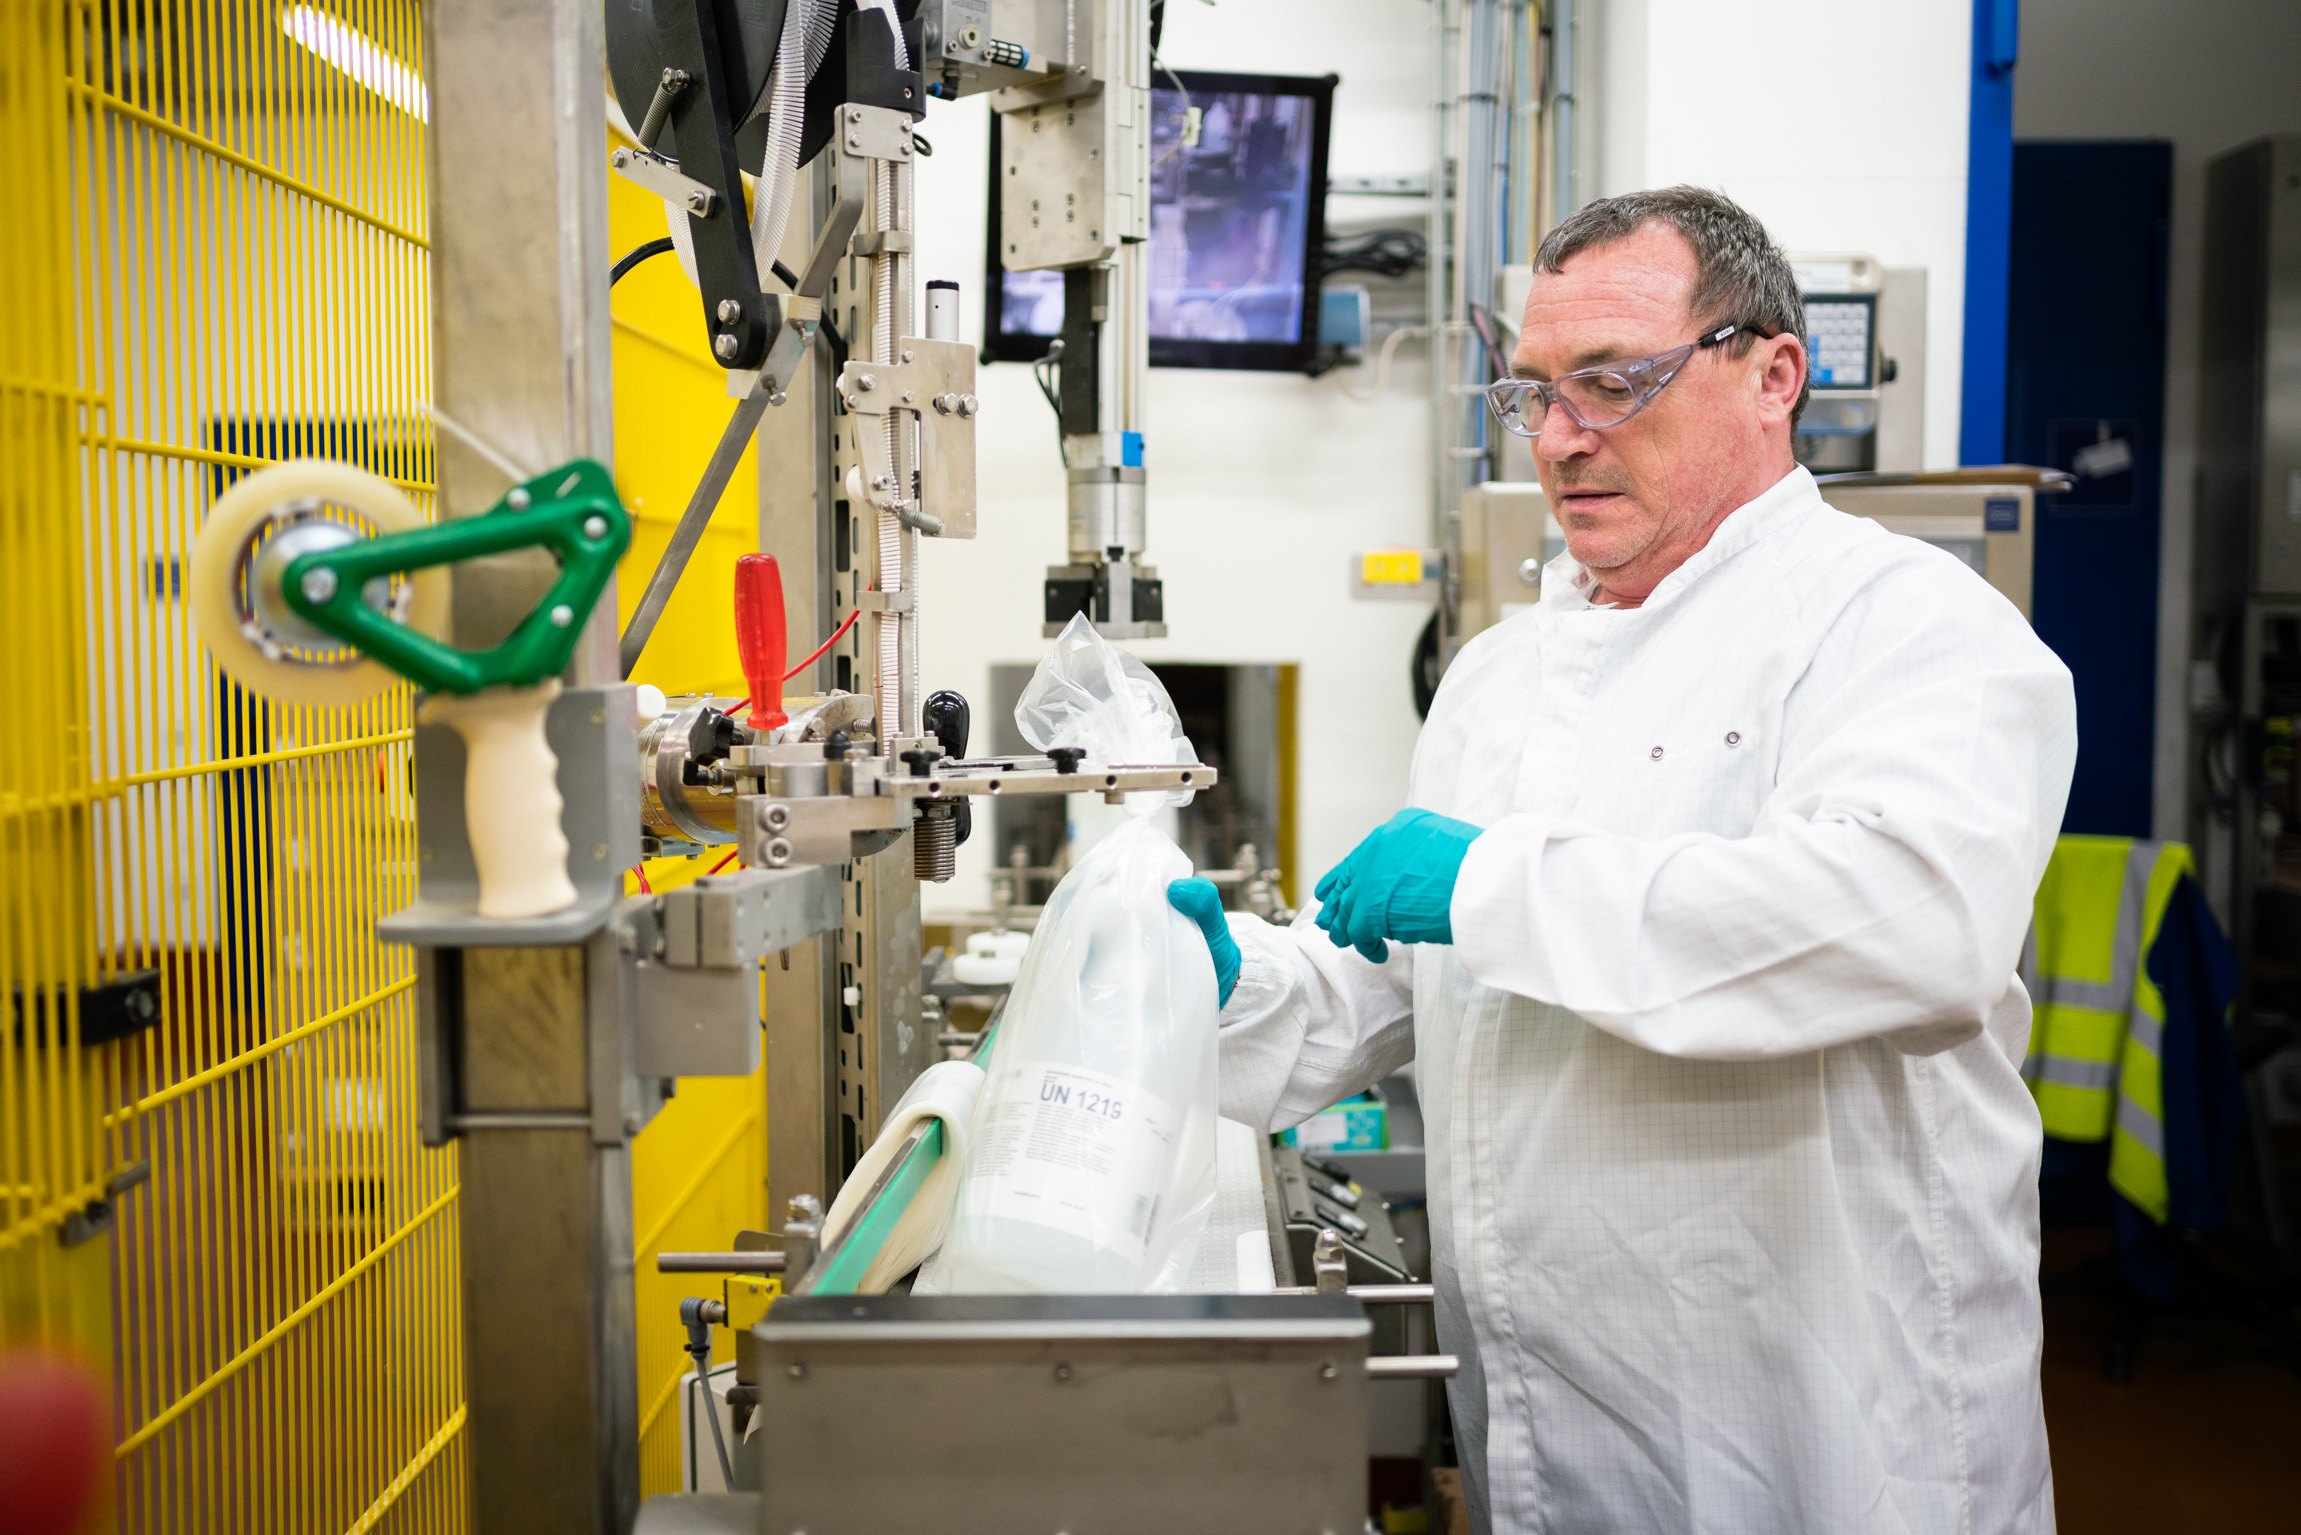 Helping Hands Basf Significantly Expands Sanitizer Production In Ludwigshafen And Supports Vci Platform For Nationwide Emergency Provision